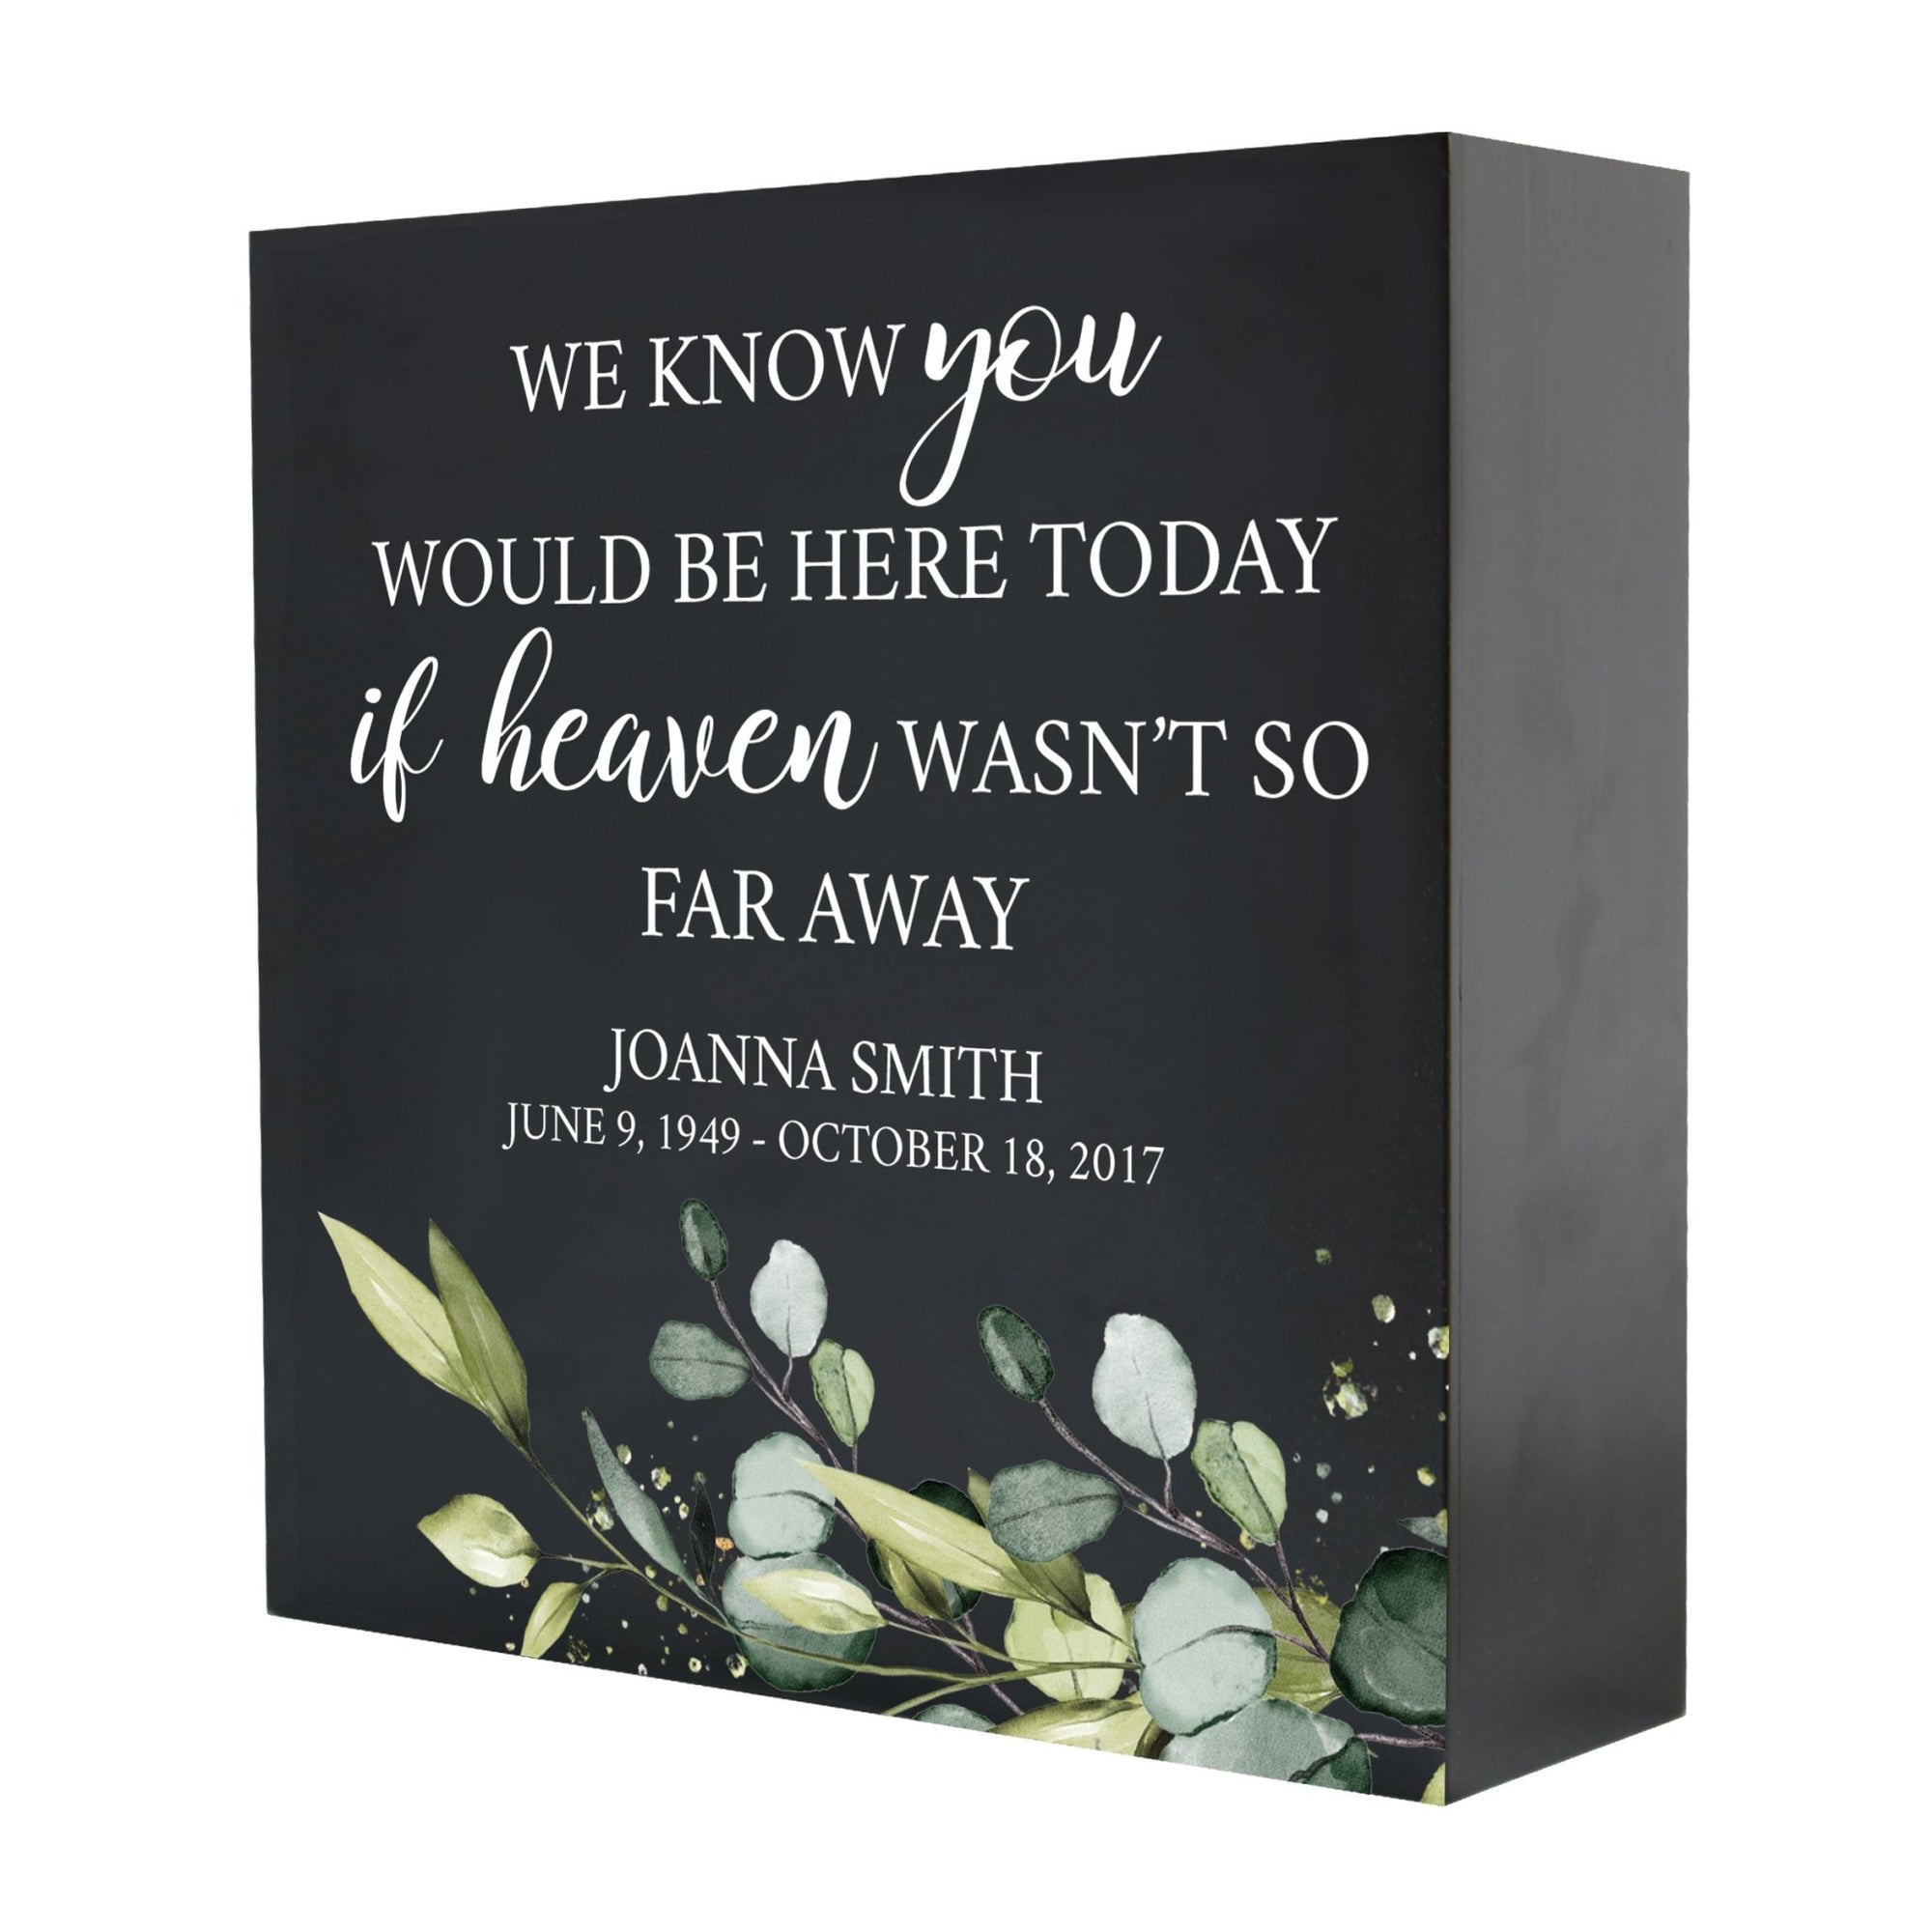 Personalized Modern Inspirational Memorial Wooden Shadow Box and Urn 10x10 holds 189 cu in of Human Ashes - We Know You Would (Heaven) - LifeSong Milestones